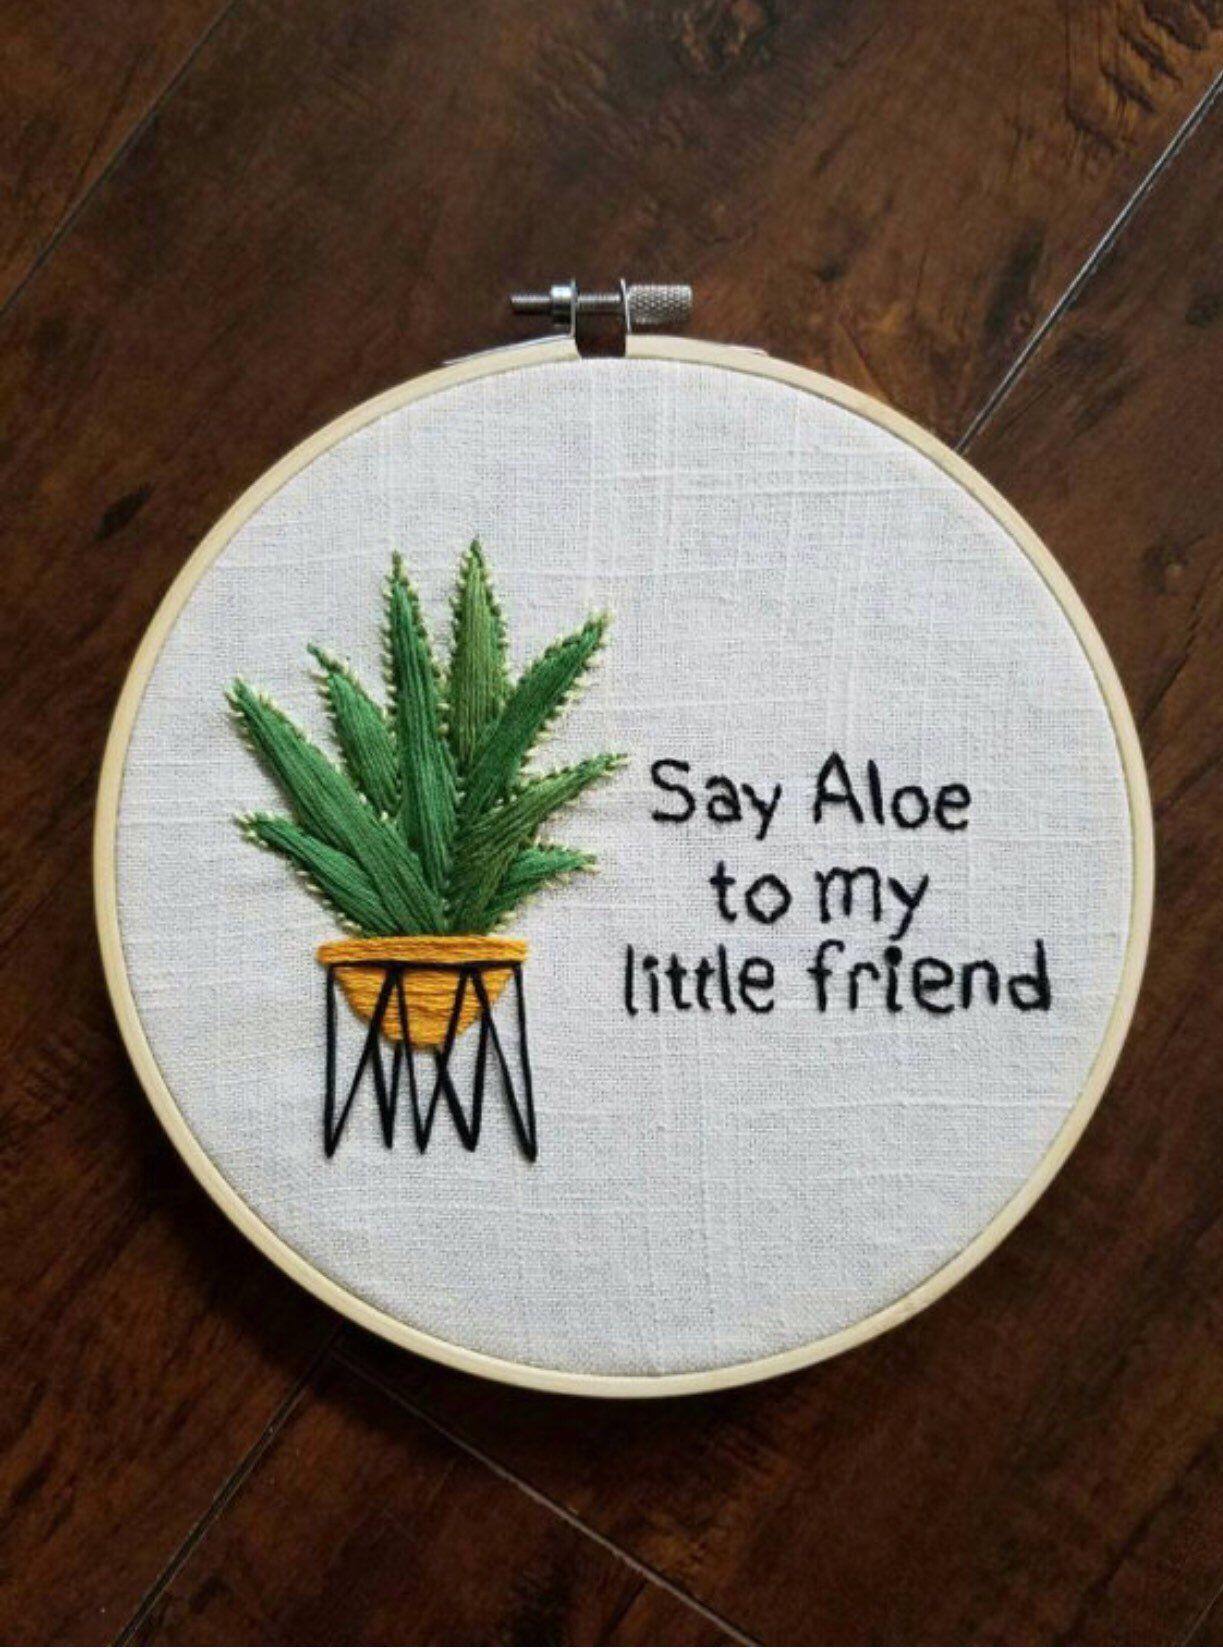 Funny pun Embroidery. Say Aloe to my little friend. Wall Hanging. Gallery Wall Hoop Art. Succulent. Cactus -   17 planting Pattern embroidery ideas